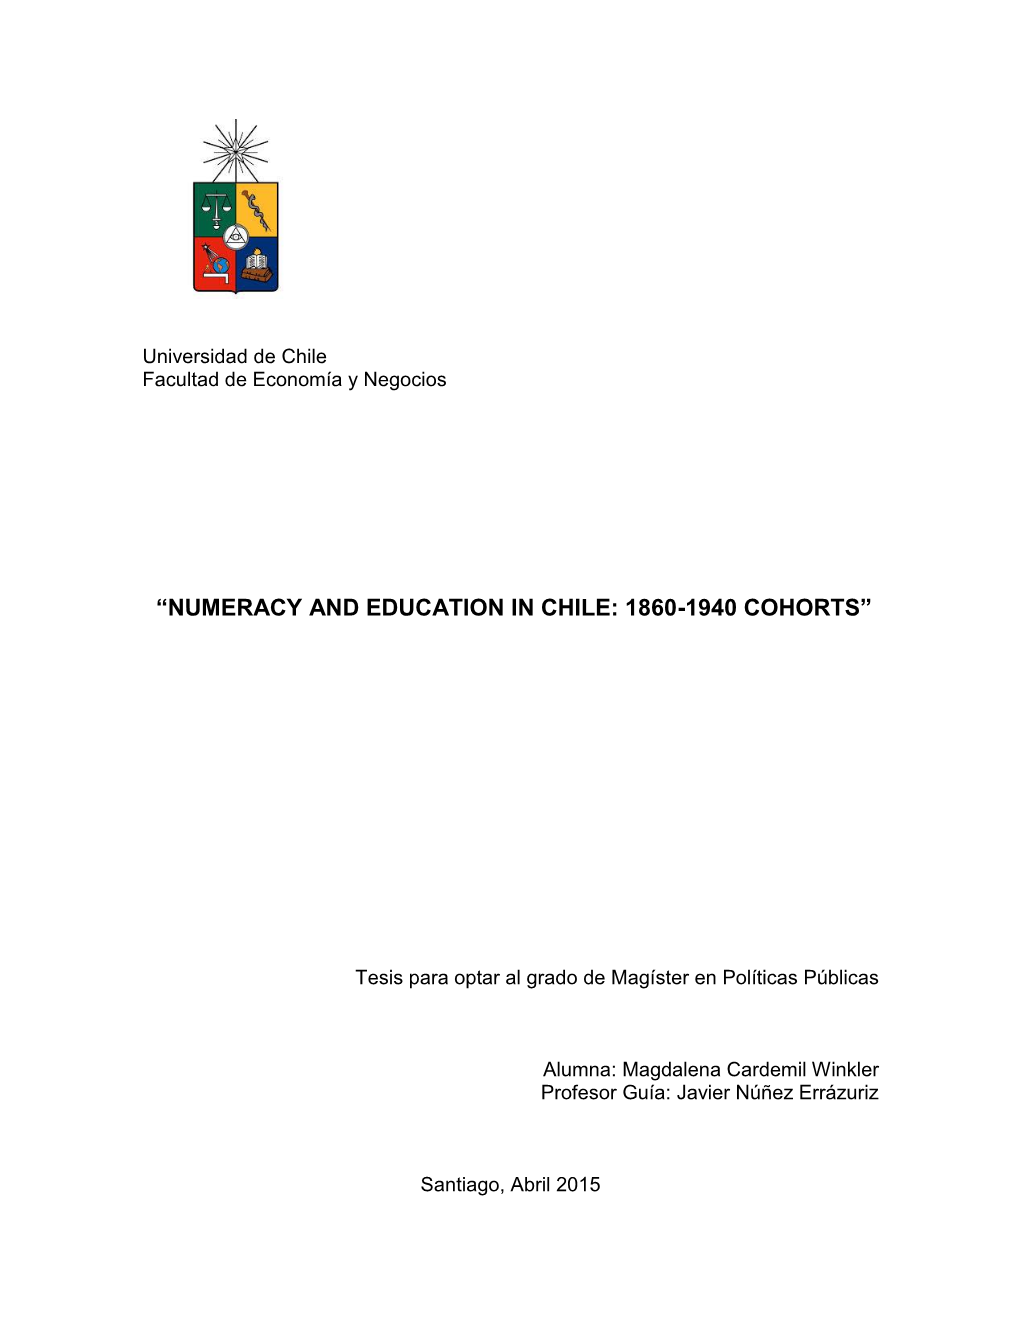 “Numeracy and Education in Chile: 1860-1940 Cohorts”